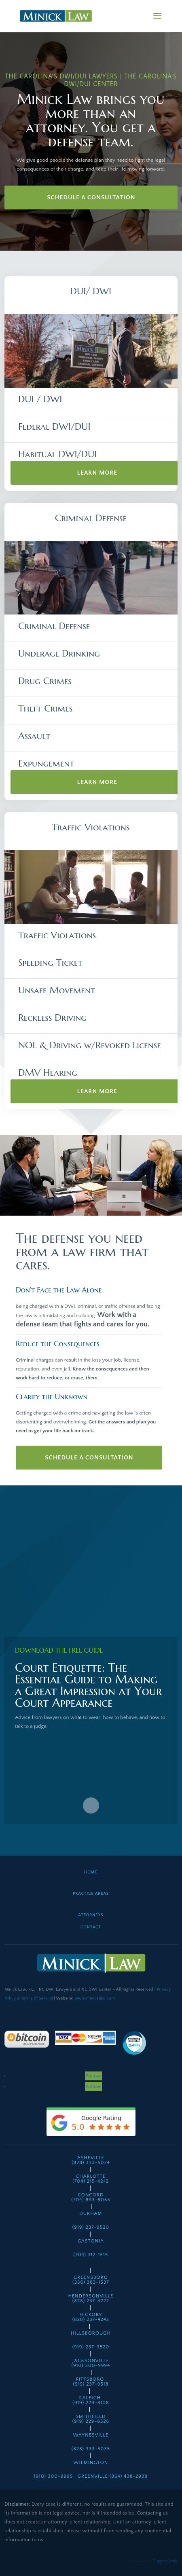 Minick Law - Asheville NC Lawyers